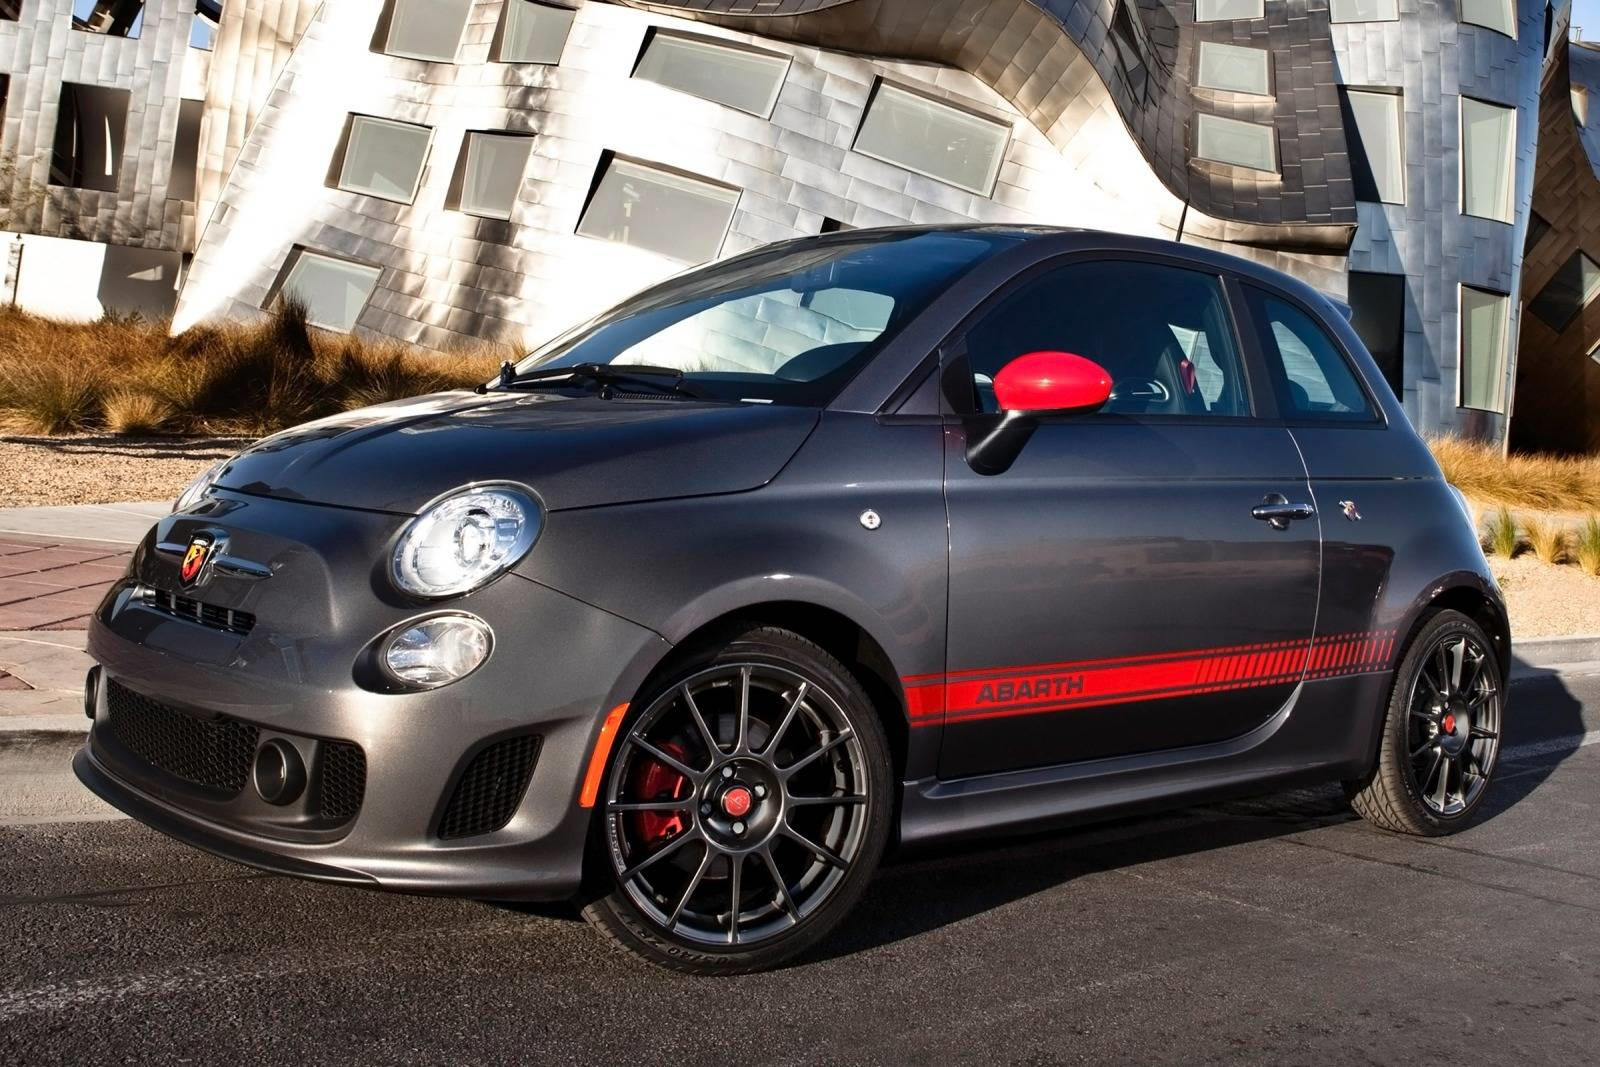 2019 Fiat 500 Abarth Review, Pricing, 500 Abarth Hatchback Models